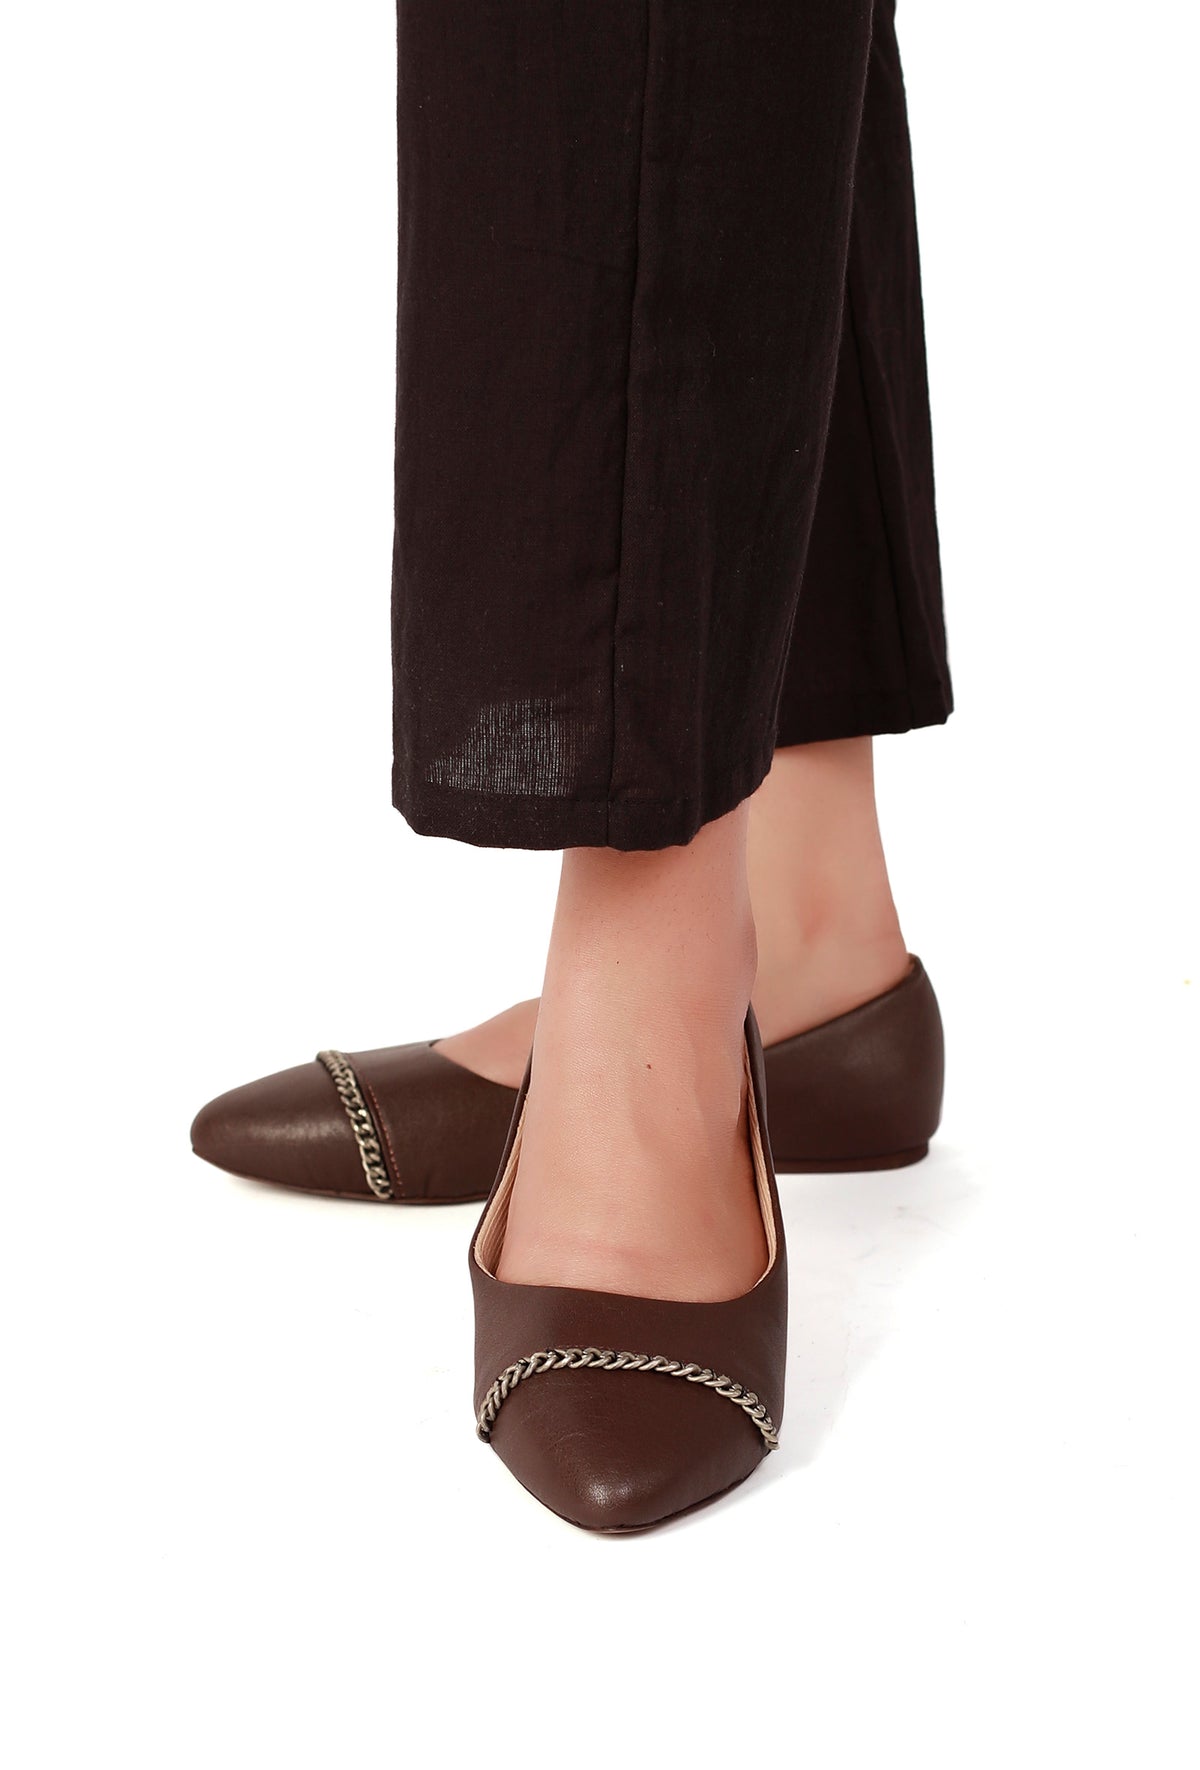 Coco Brown Chain Cruelty-Free Leather Mules